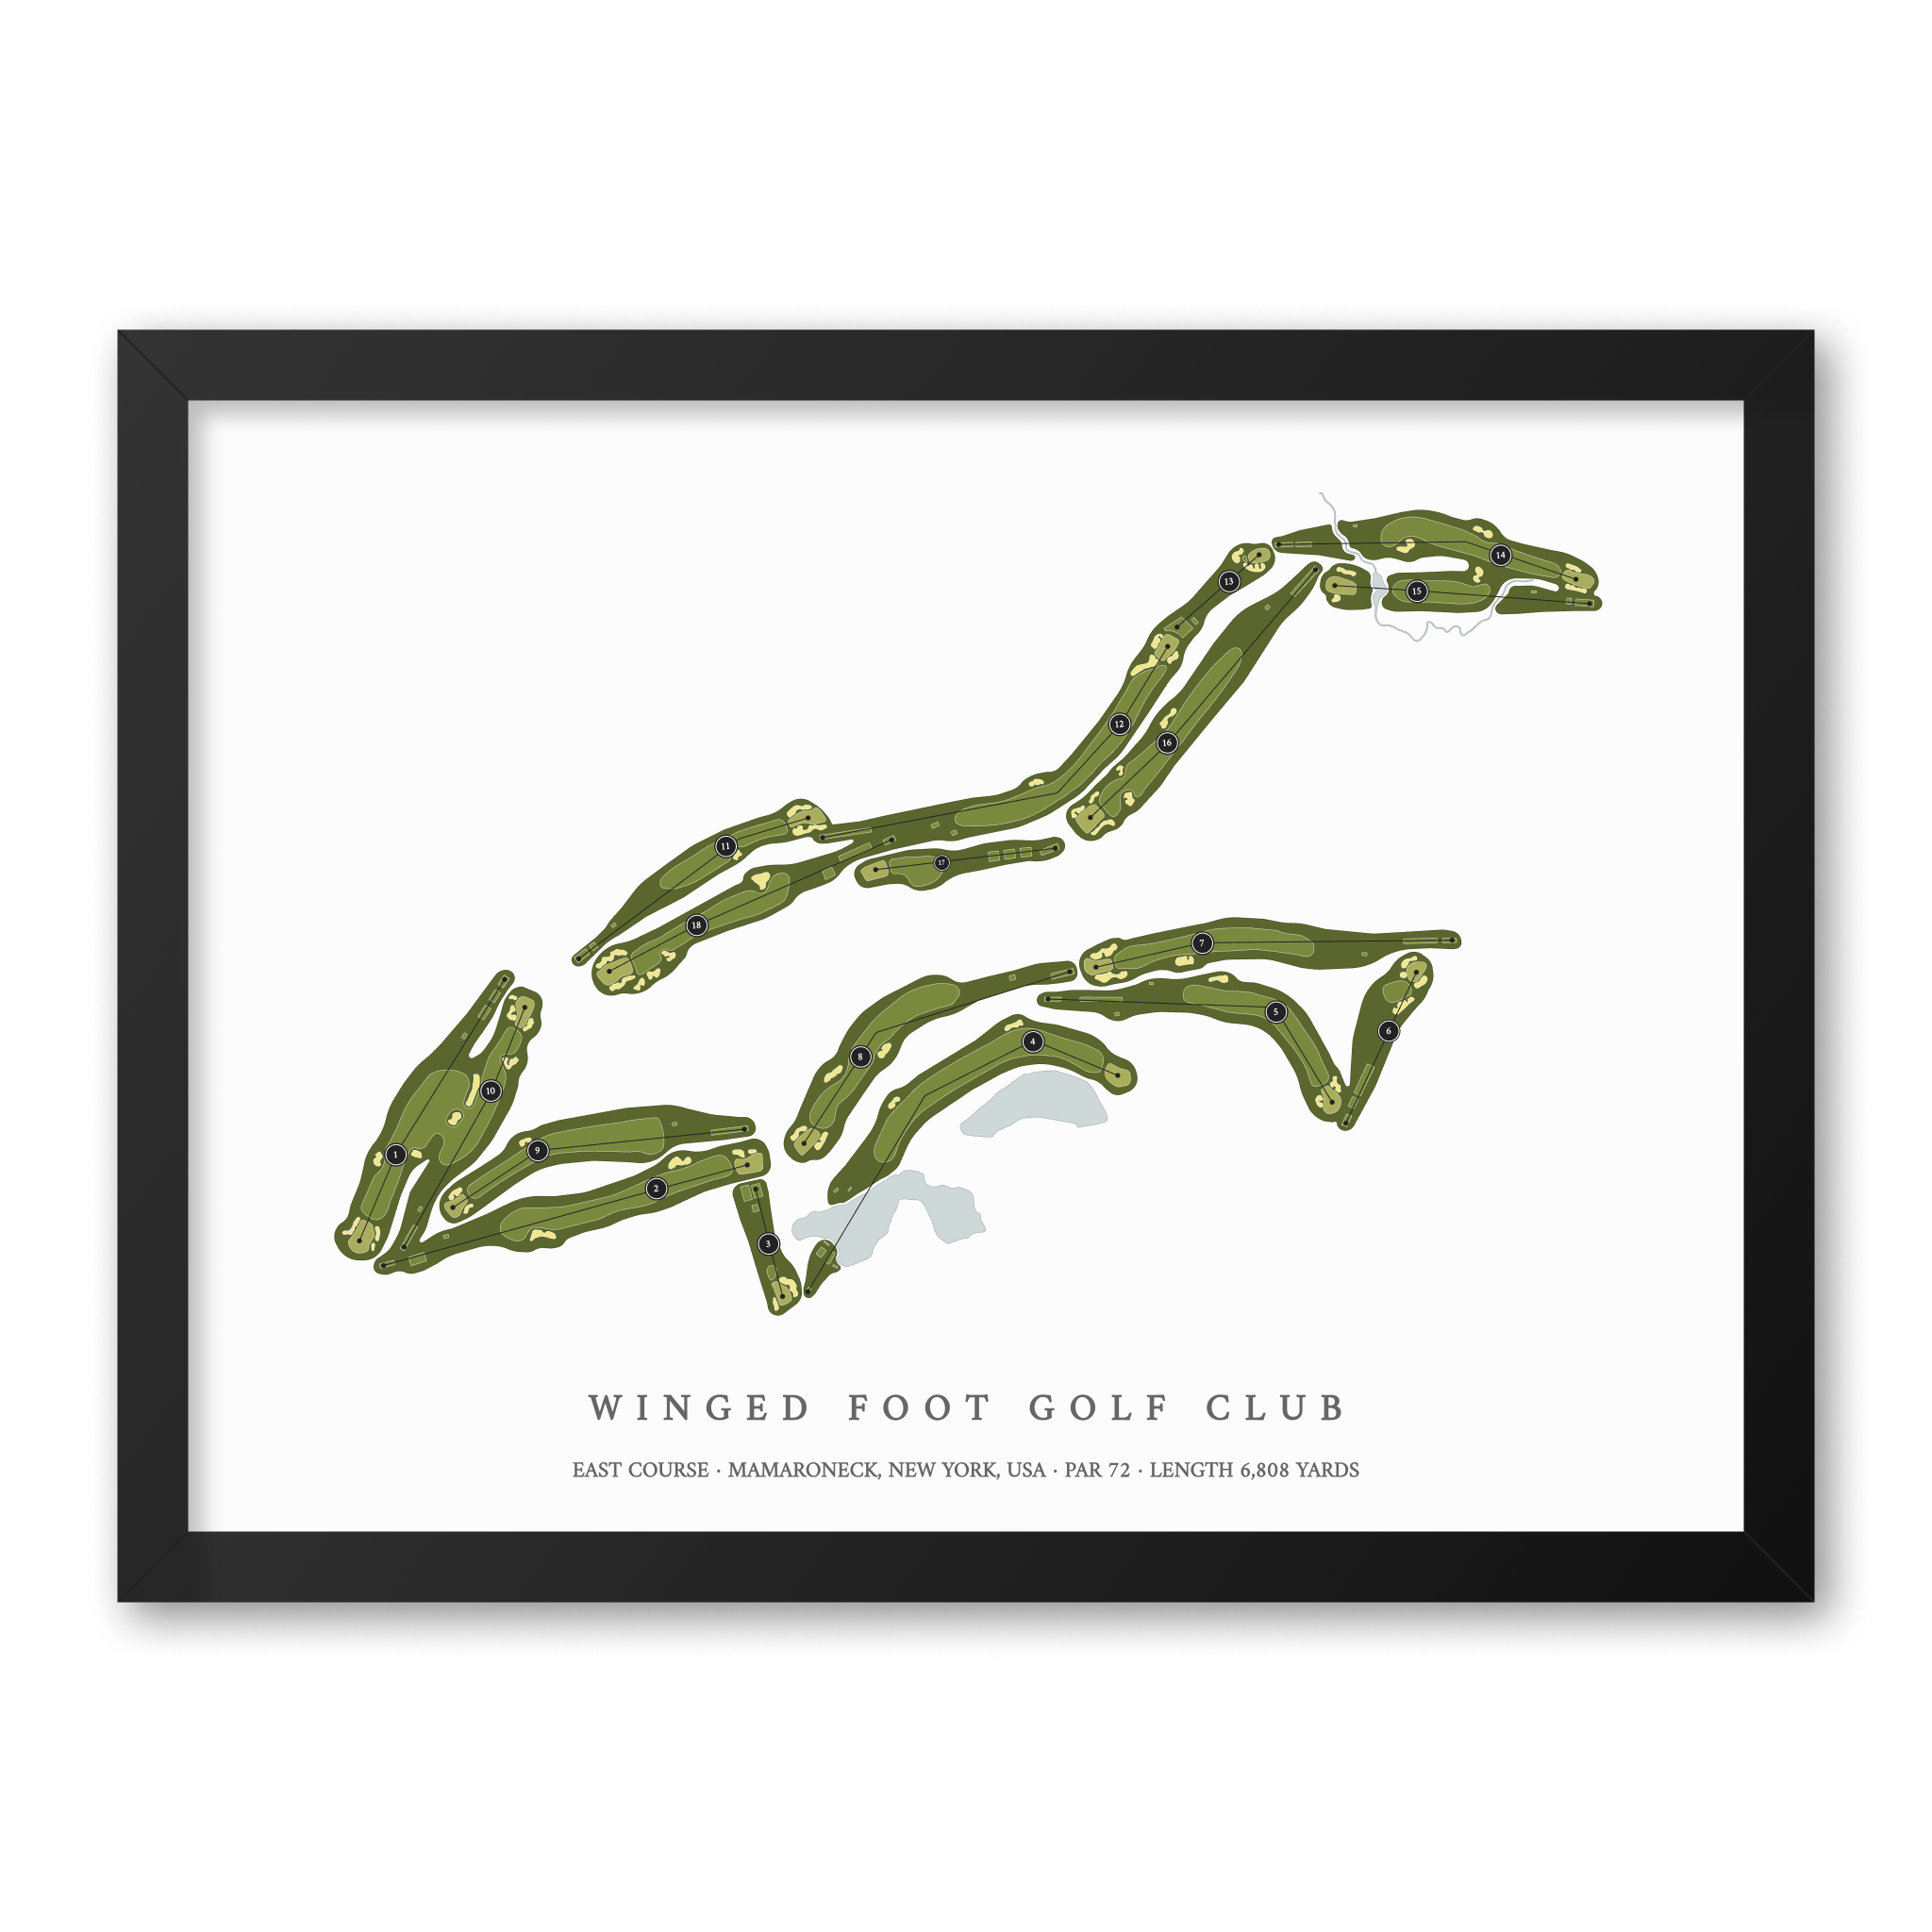 Winged Foot Golf Club - East Course| Golf Course Print | Black Frame With Hole Numbers #hole numbers_yes